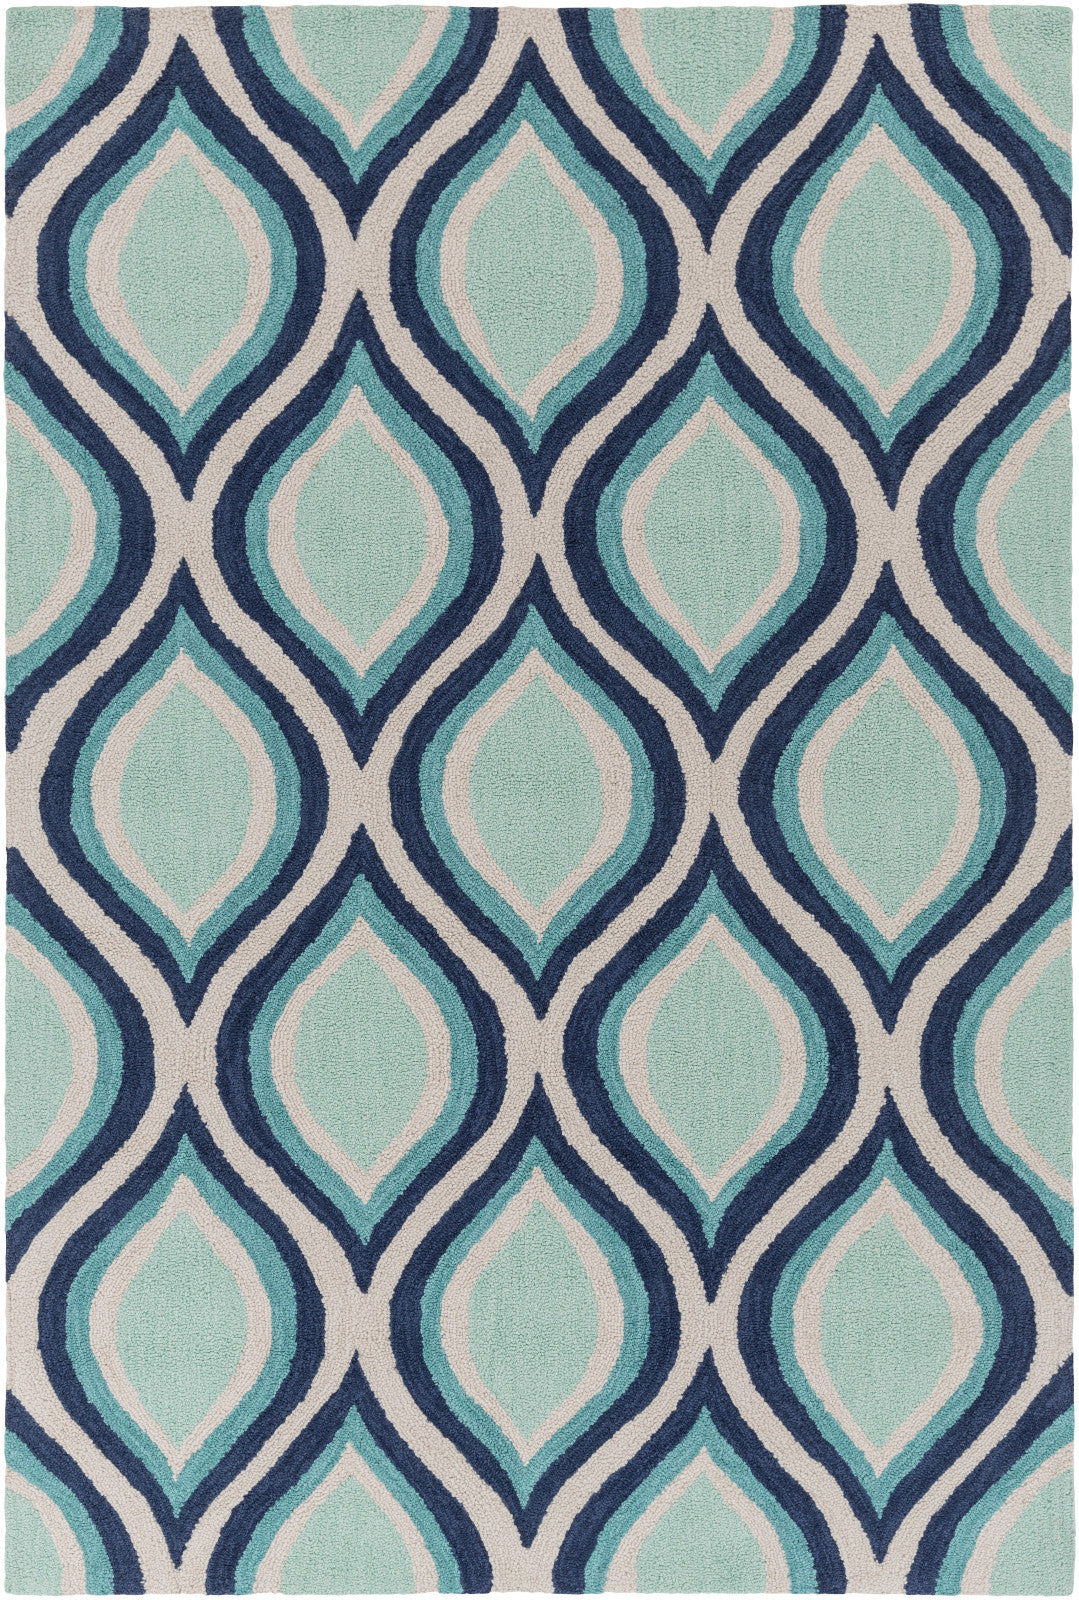 Artistic Weavers Holden Lucy Navy Blue/Turquoise Area Rug main image